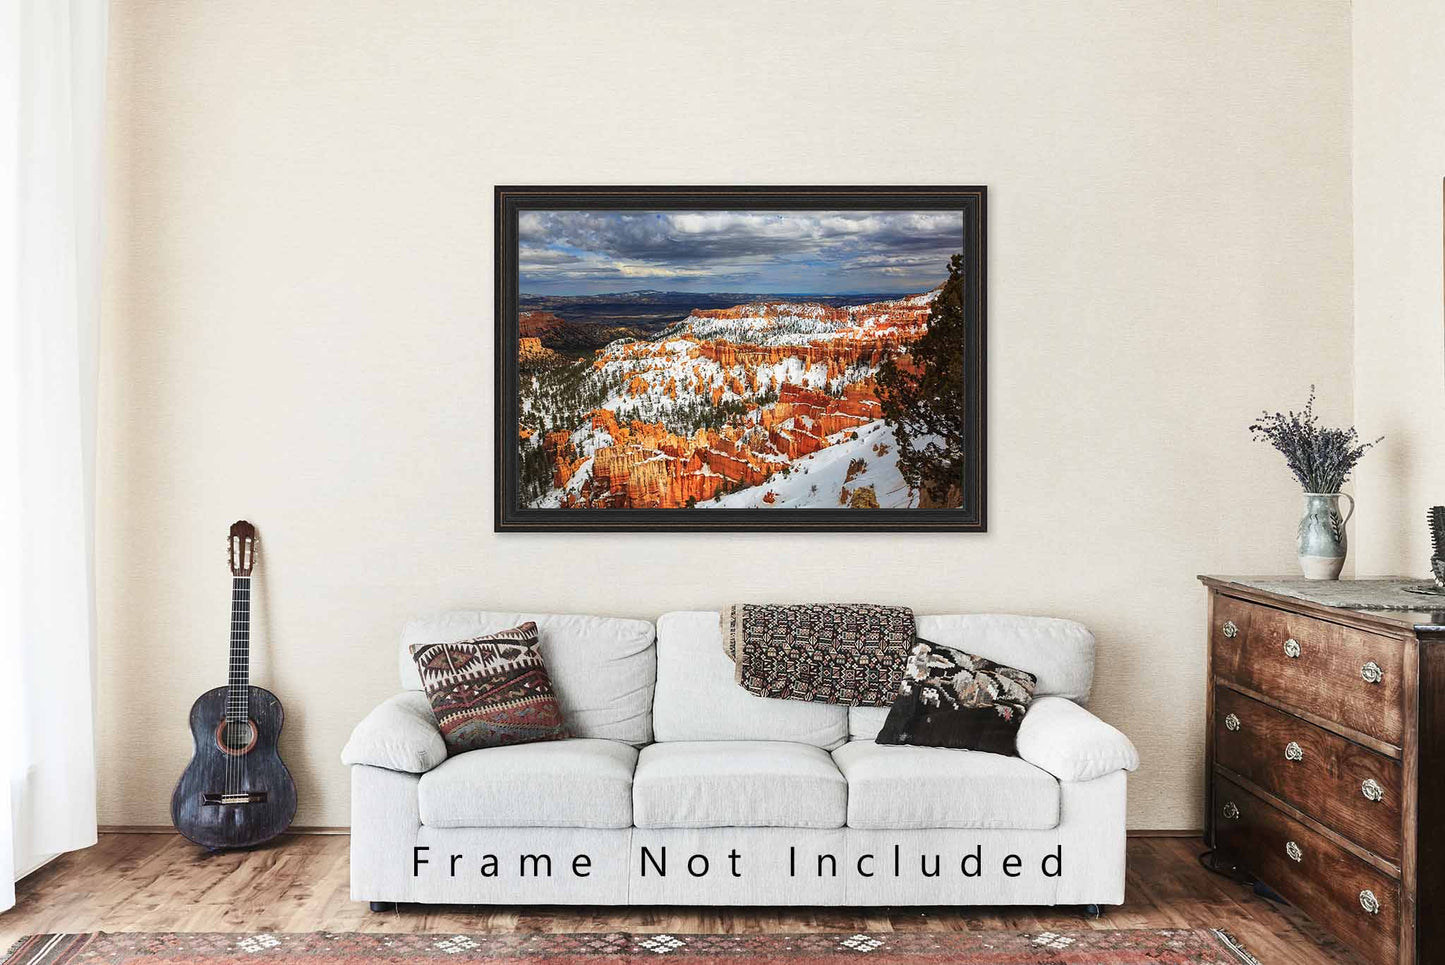 Southwestern Photography Print (Not Framed) Picture of Snow Covered Hoodoos in Bryce Canyon National Park Utah Western Wall Art Nature Decor